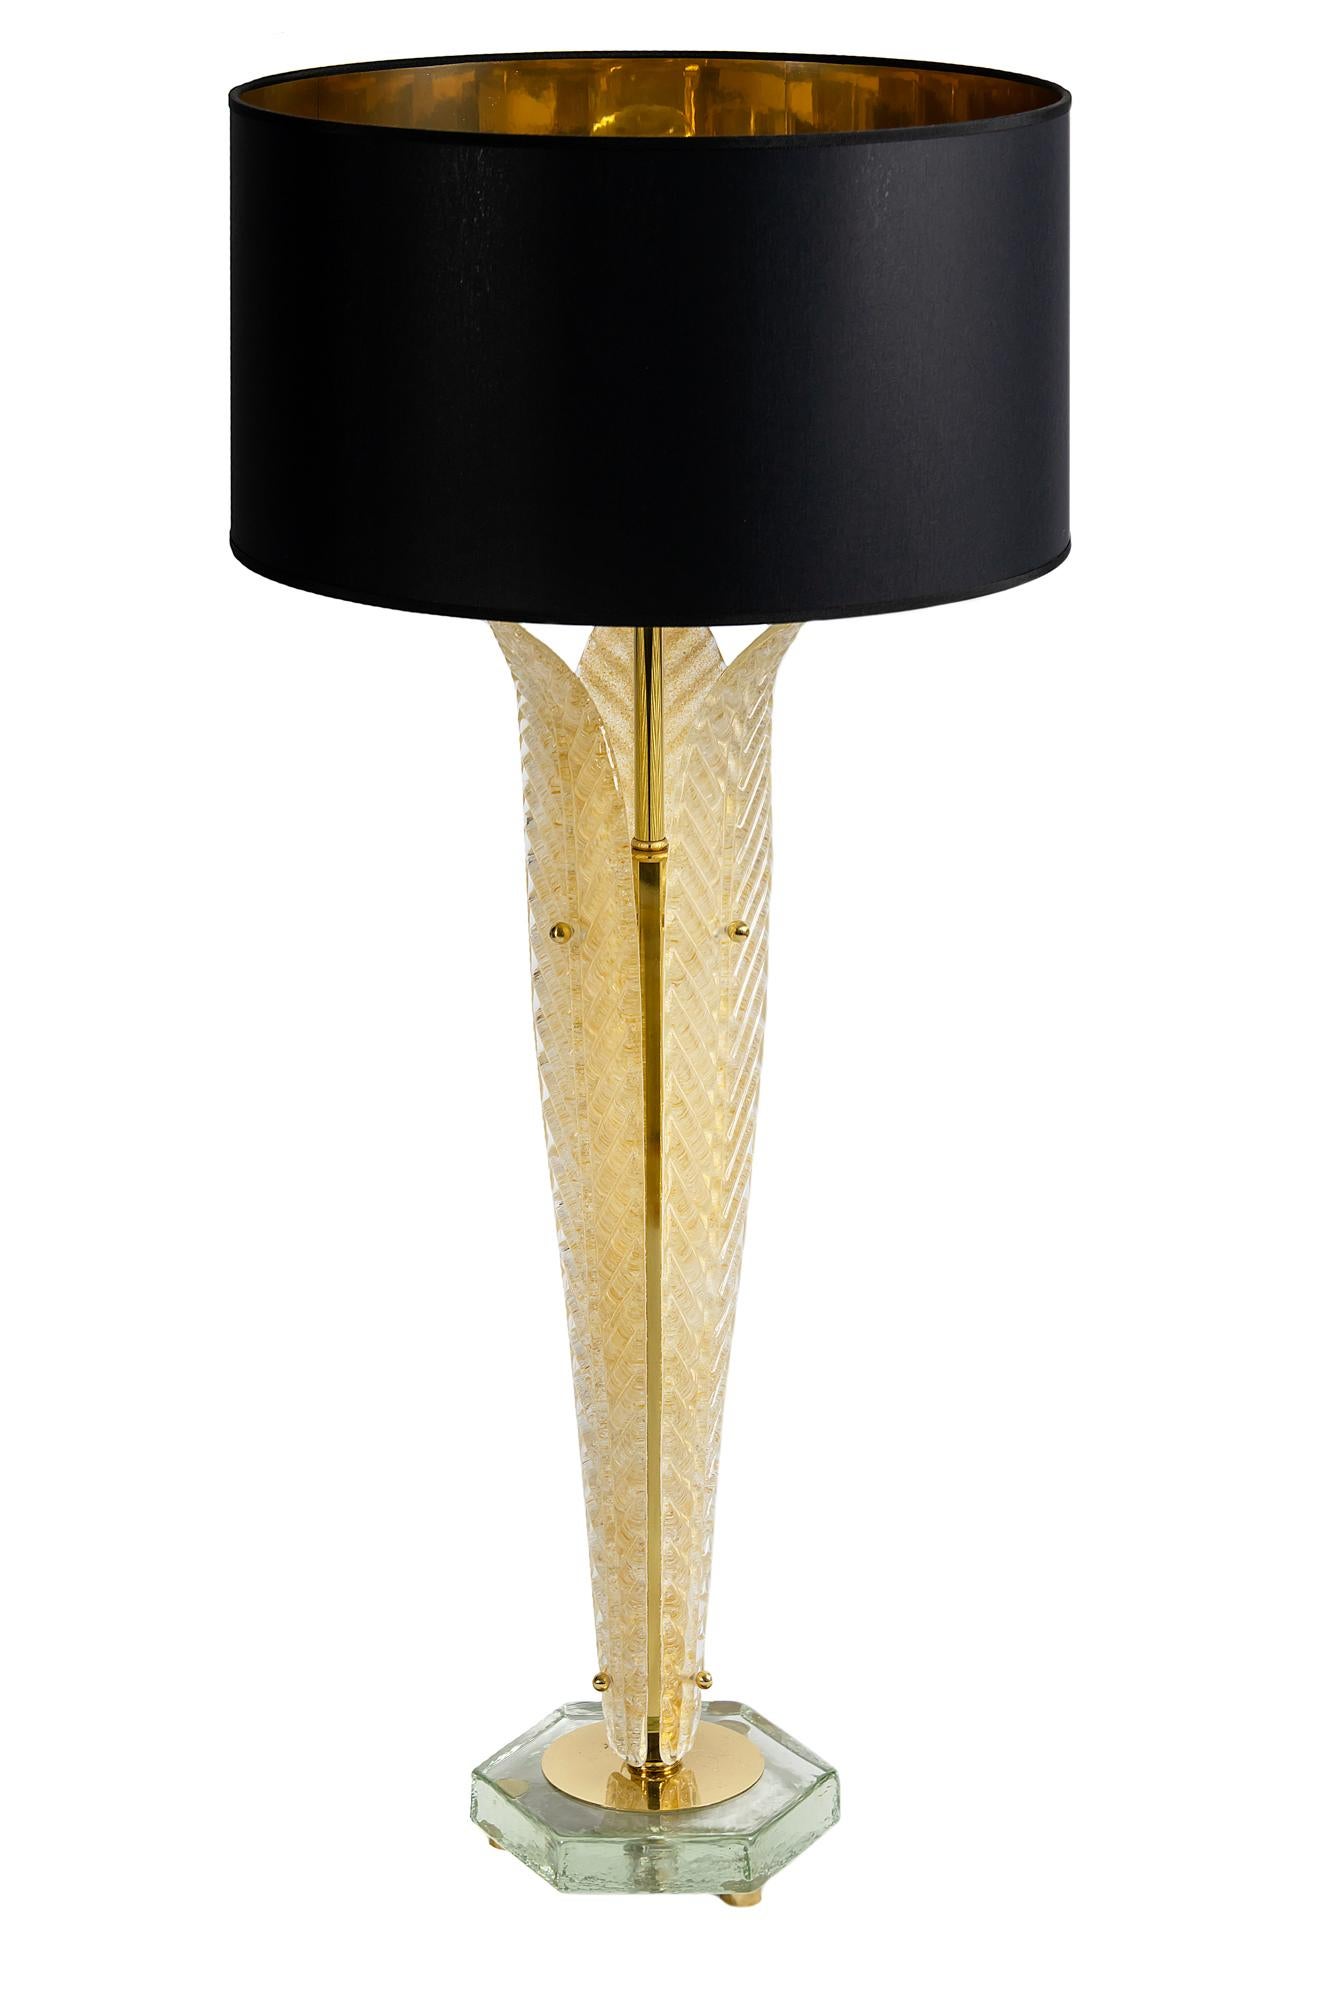 This pair of Italian table lamps are made of 3 pieces leaf form Murano glass. The glass is lightly golden. The base is made of polygon form thick clear glass with small round brass legs. Both lamps are with new made satin finish black color textile